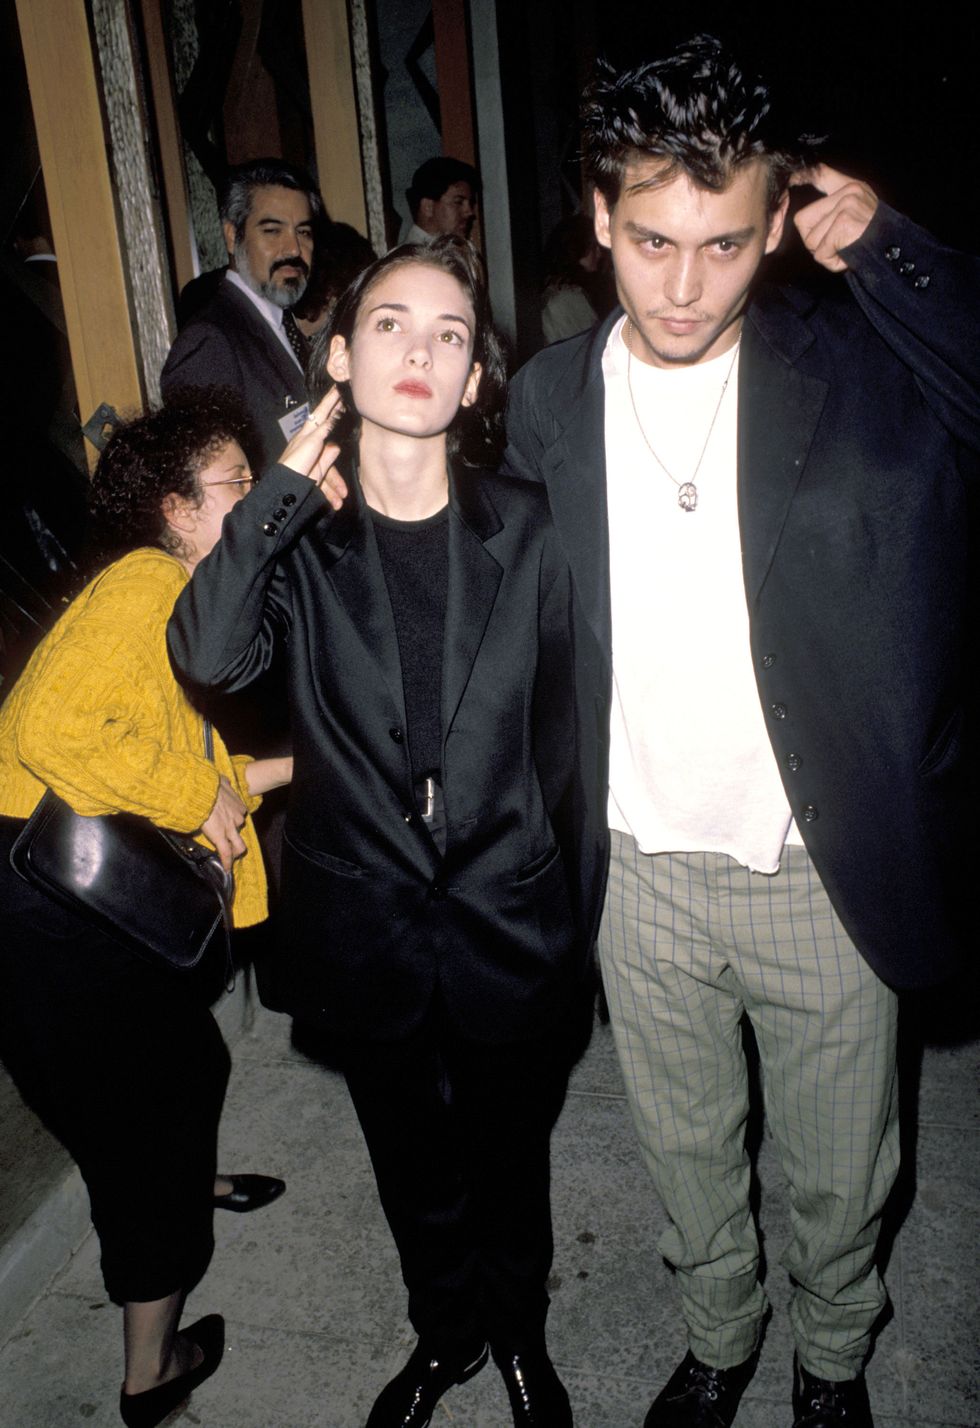 johnny depp and winona ryder during pacific heights los angeles premiere at avco westwood theatre in los angeles, ca, united states photo by jim smealron galella collection via getty images